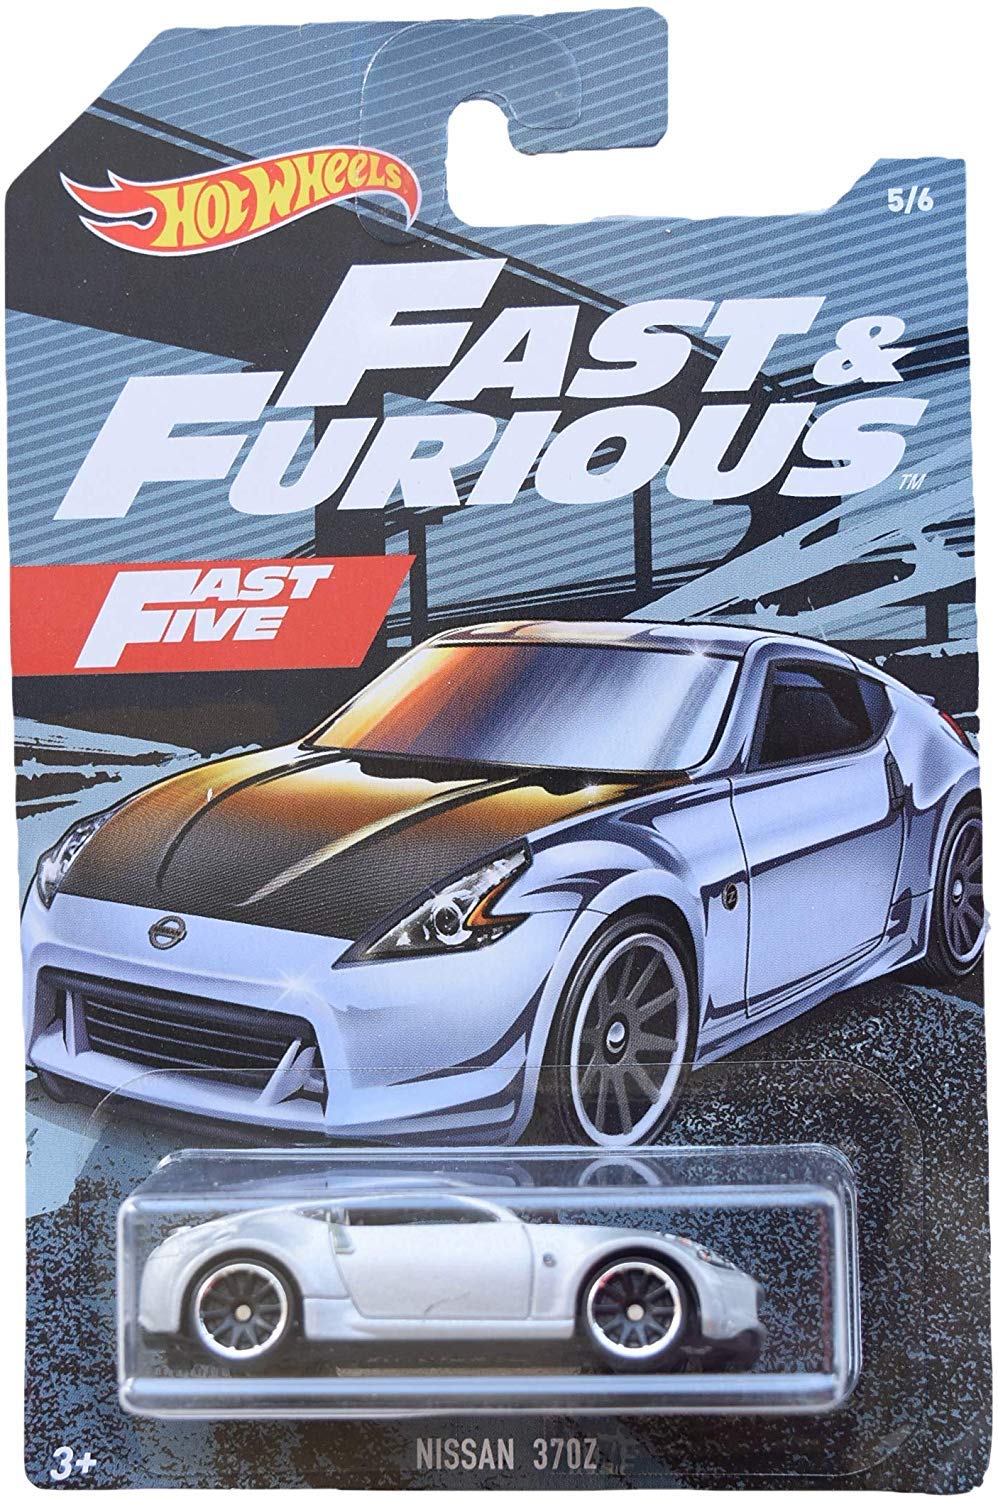 Amazon.com: Hot Wheels Fast & Furious Nissan 370Z 5/6, Silver : Toys & Games